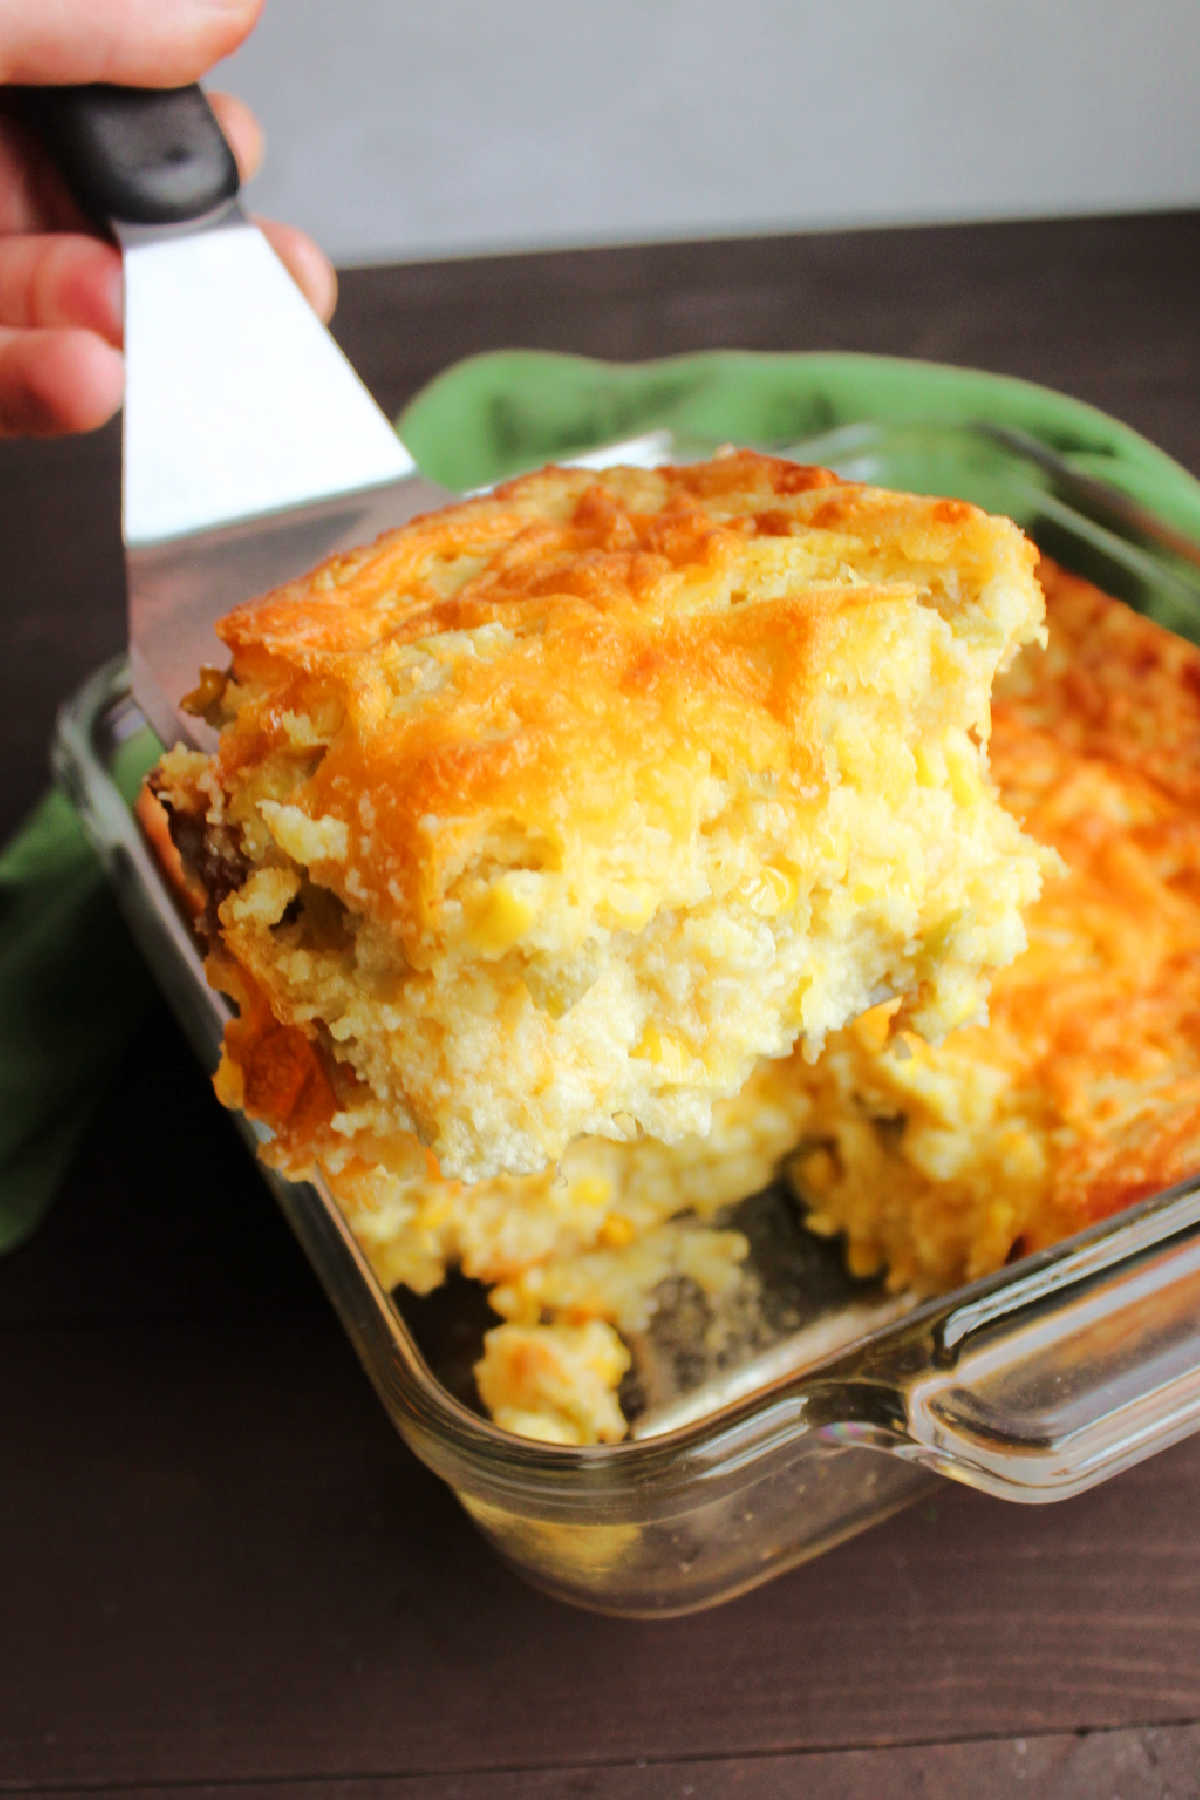 spatula lifting out slice of chili cheese corn casserole showing soft interior.